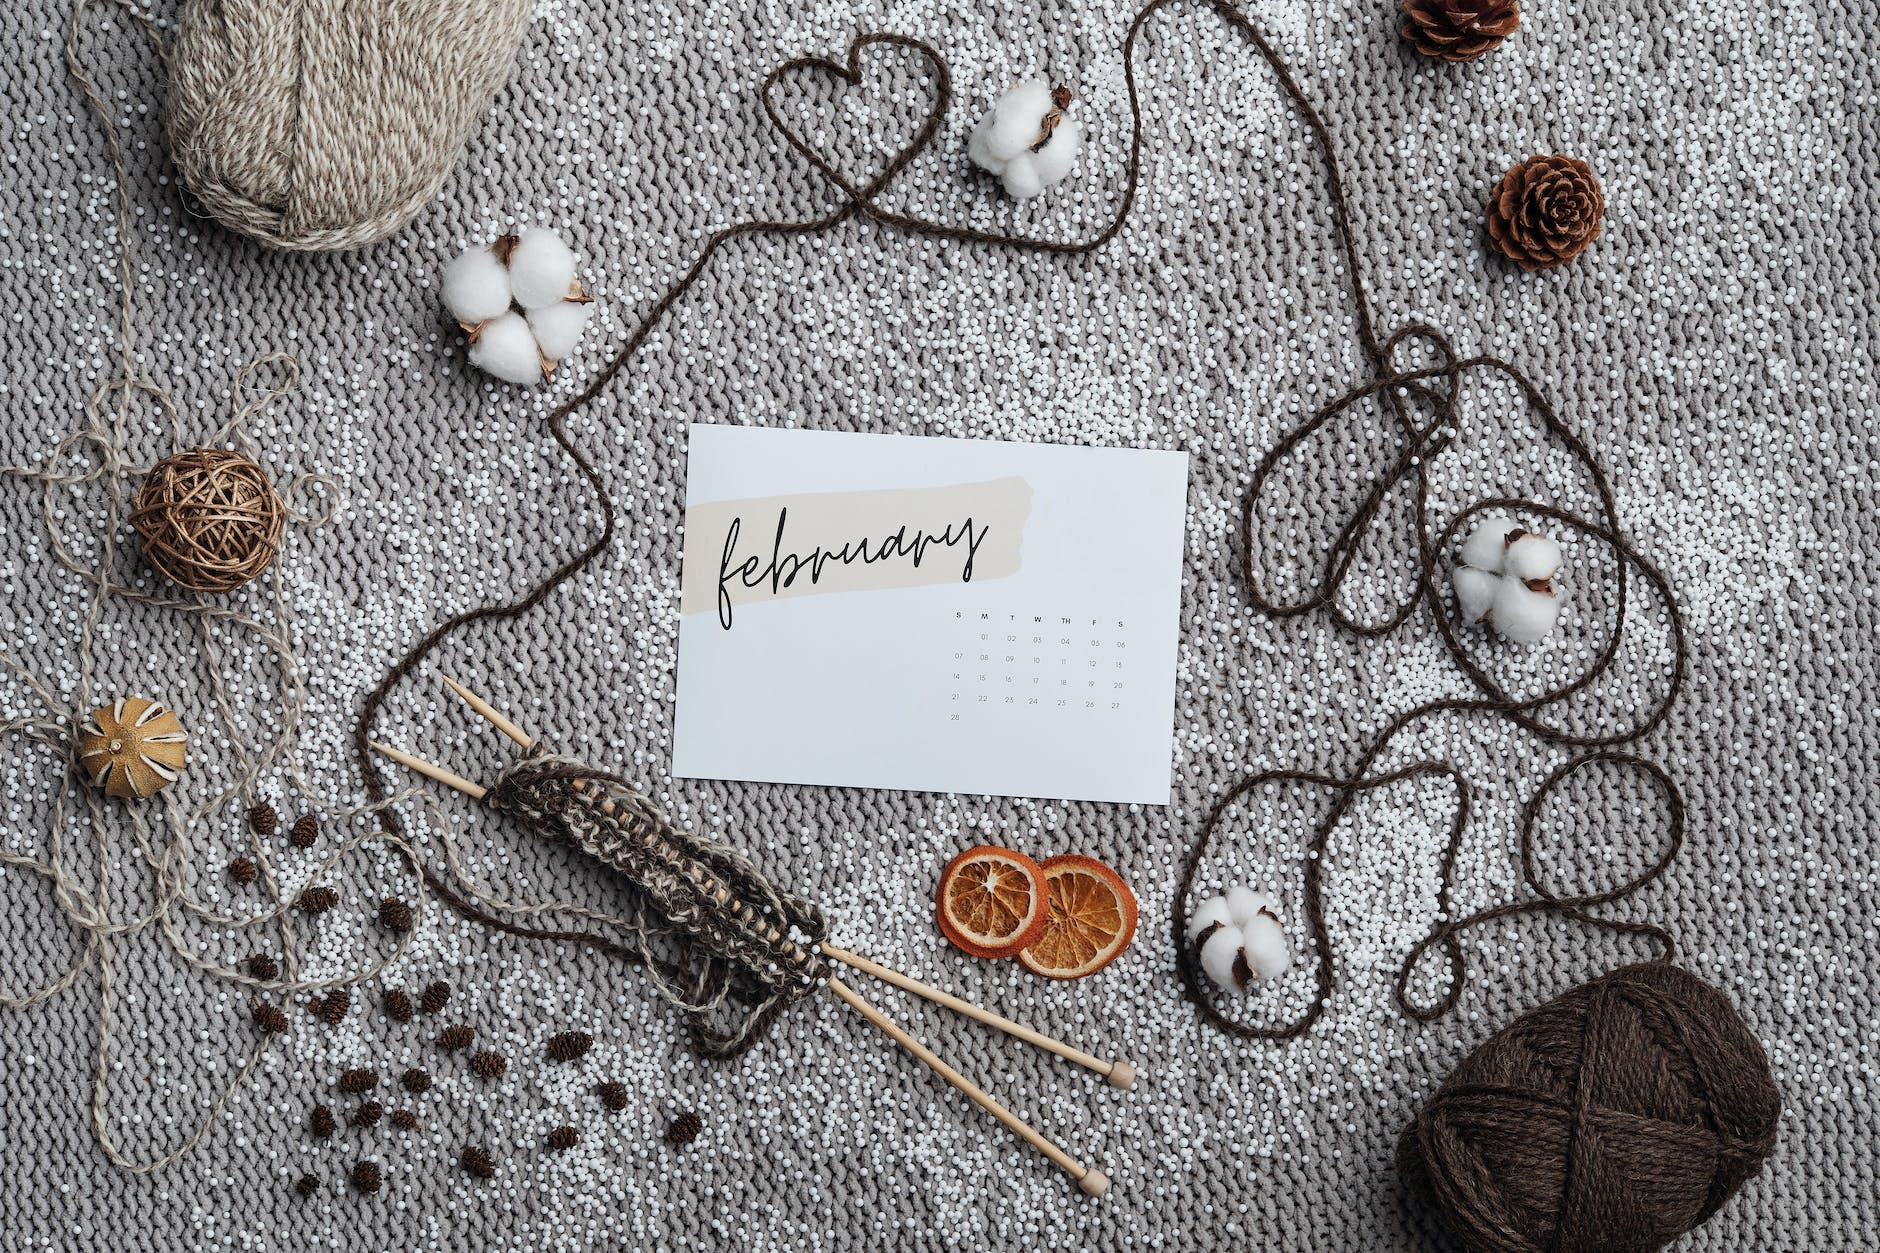 flatlay of crocheting objects on a gray surface